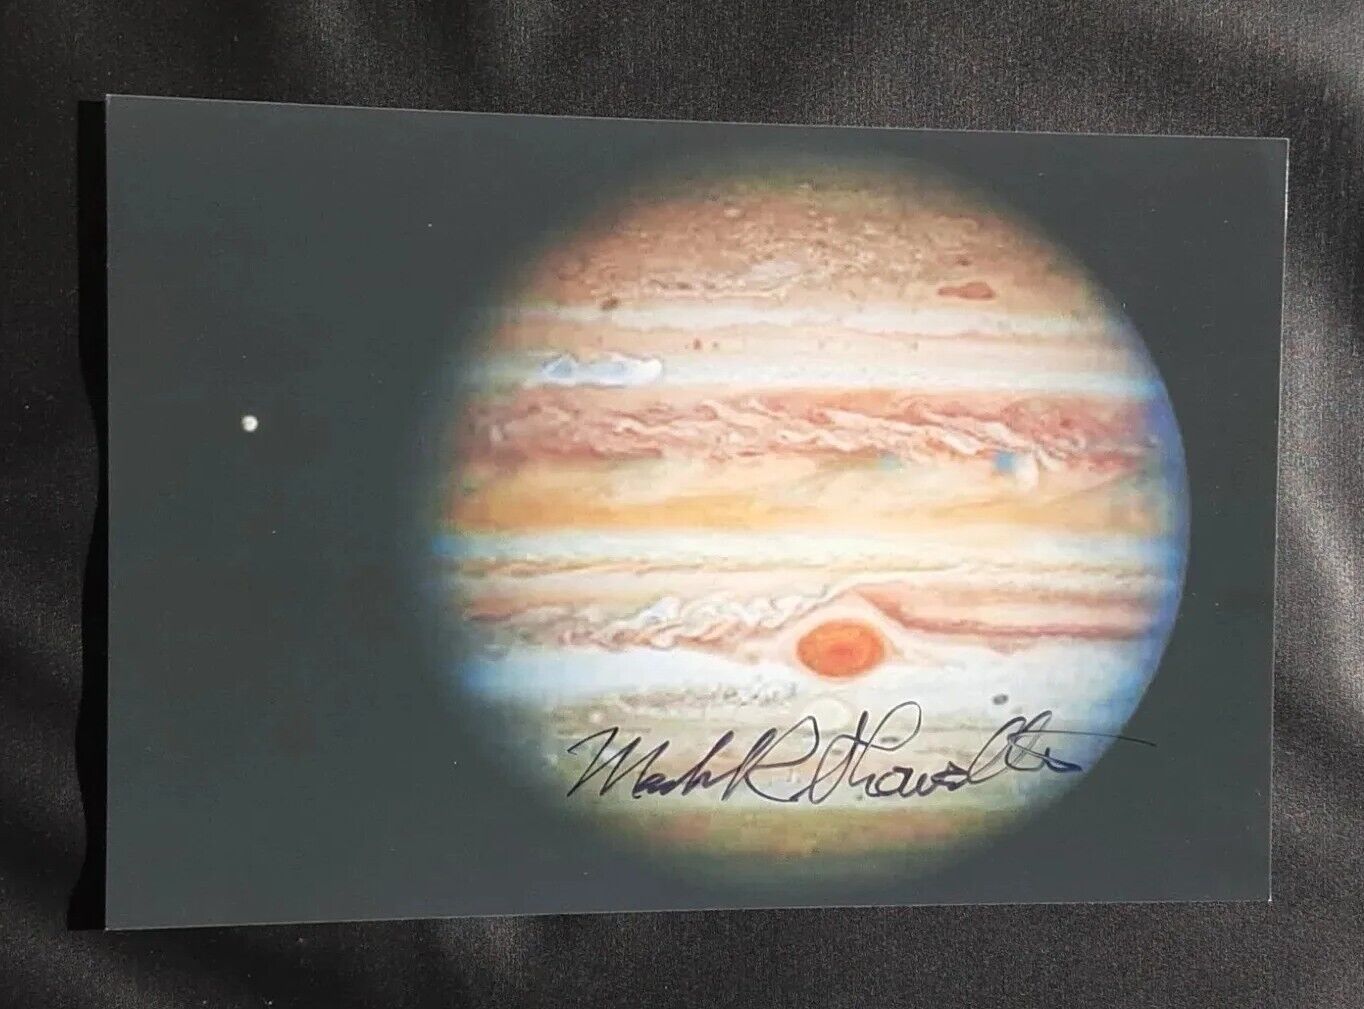 MARK SHOWALTER PLANETARY SCIENTIST SETI AUTOGRAPHED SIGNED GLOSSY 4x6 PHOTO